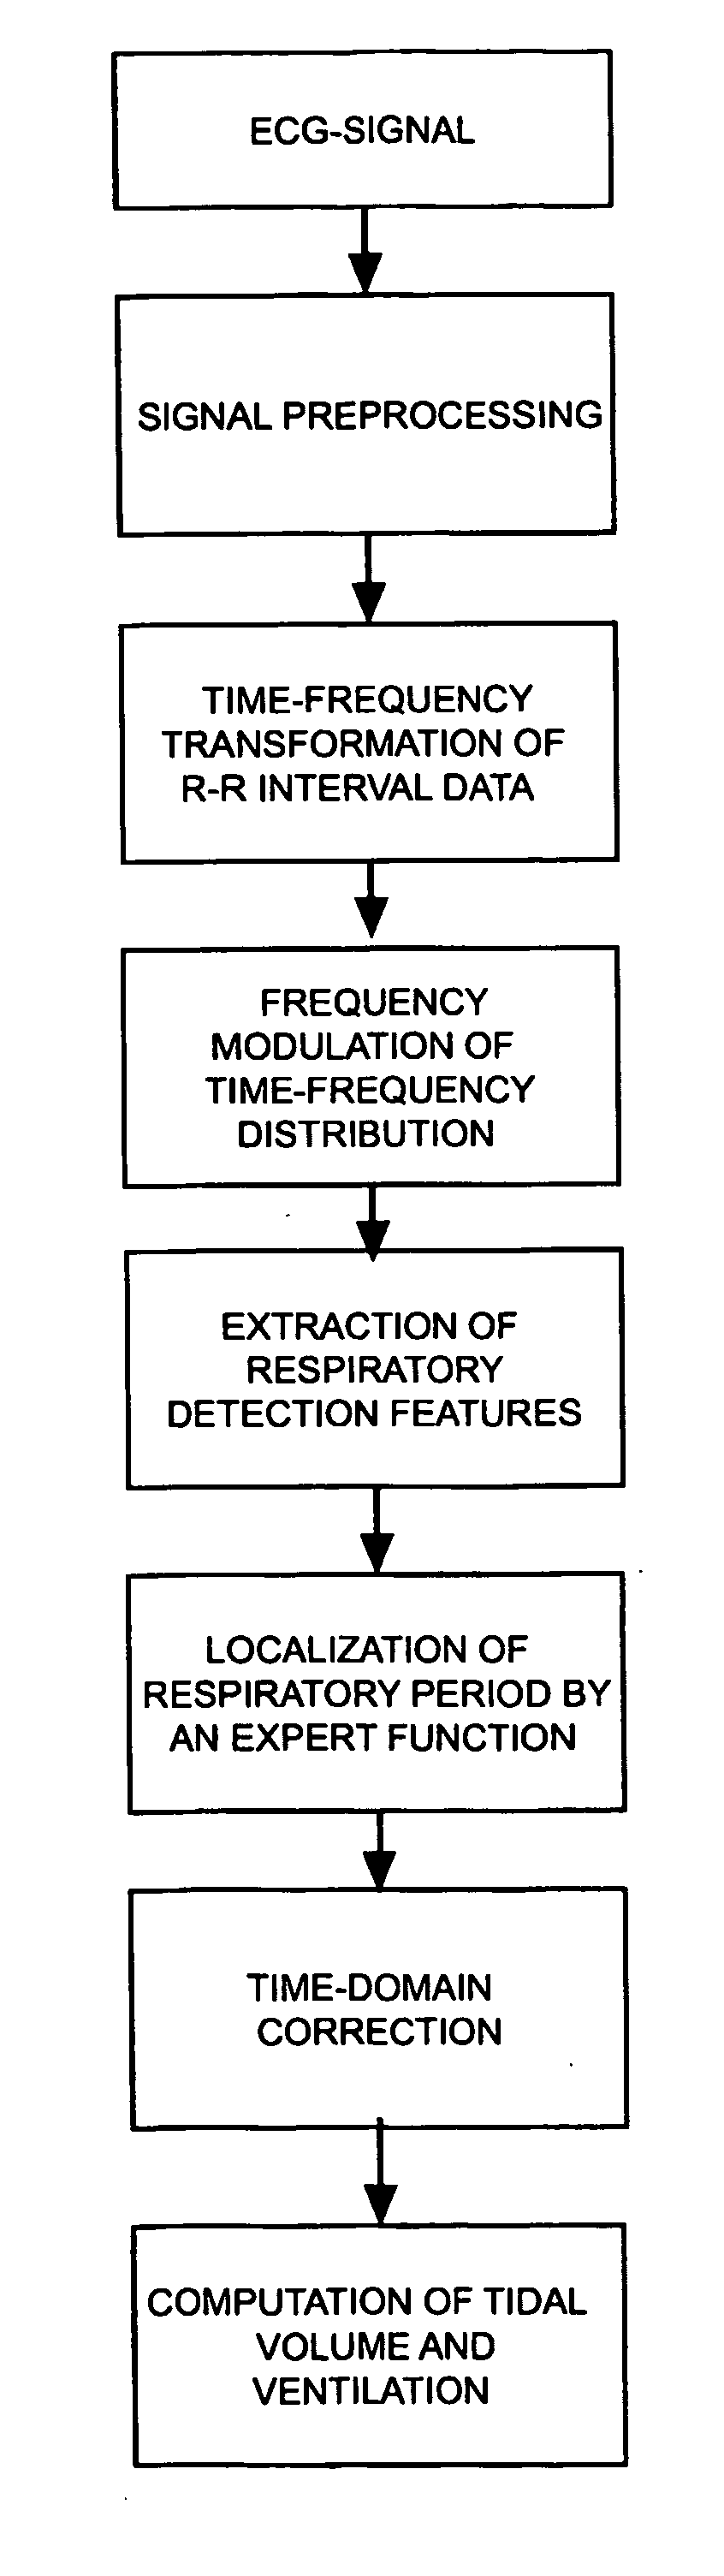 Procedure for deriving reliable information on respiratory activity from heart period measurement